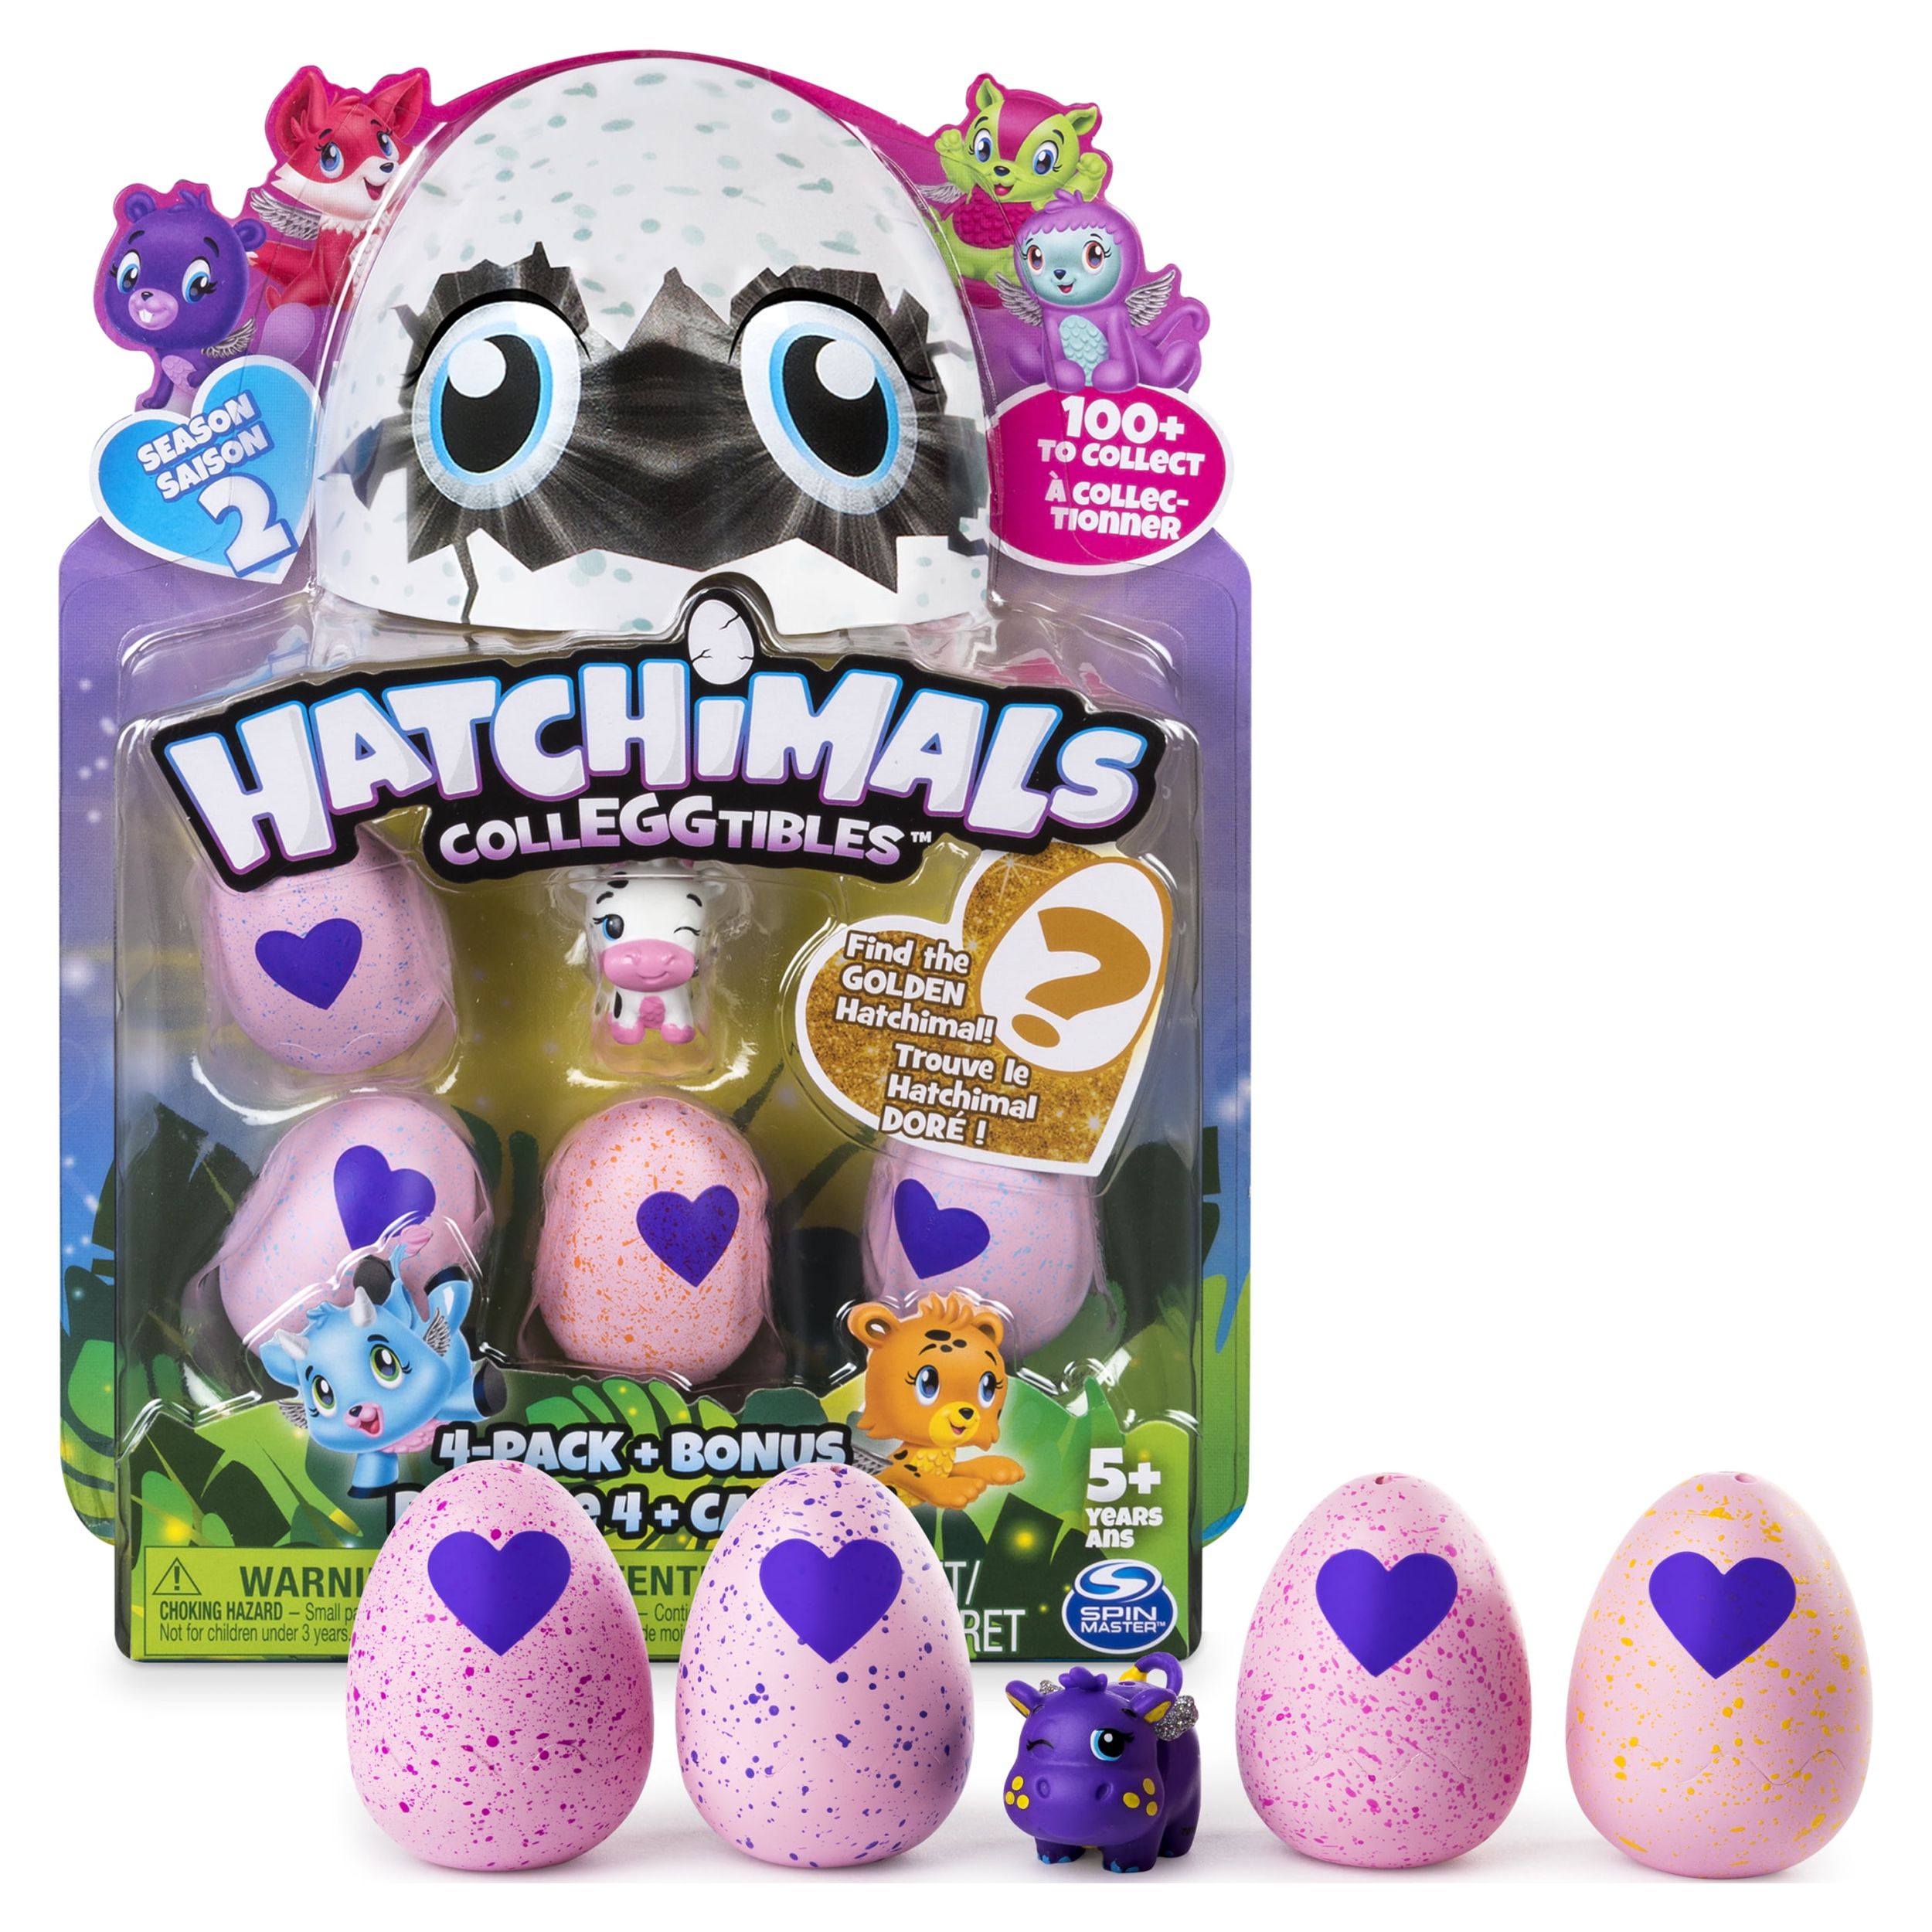 Hatchimals CollEGGtibles Season 2, 4 Pack + Bonus (Styles & Colors May Vary) by Spin Master - image 1 of 8